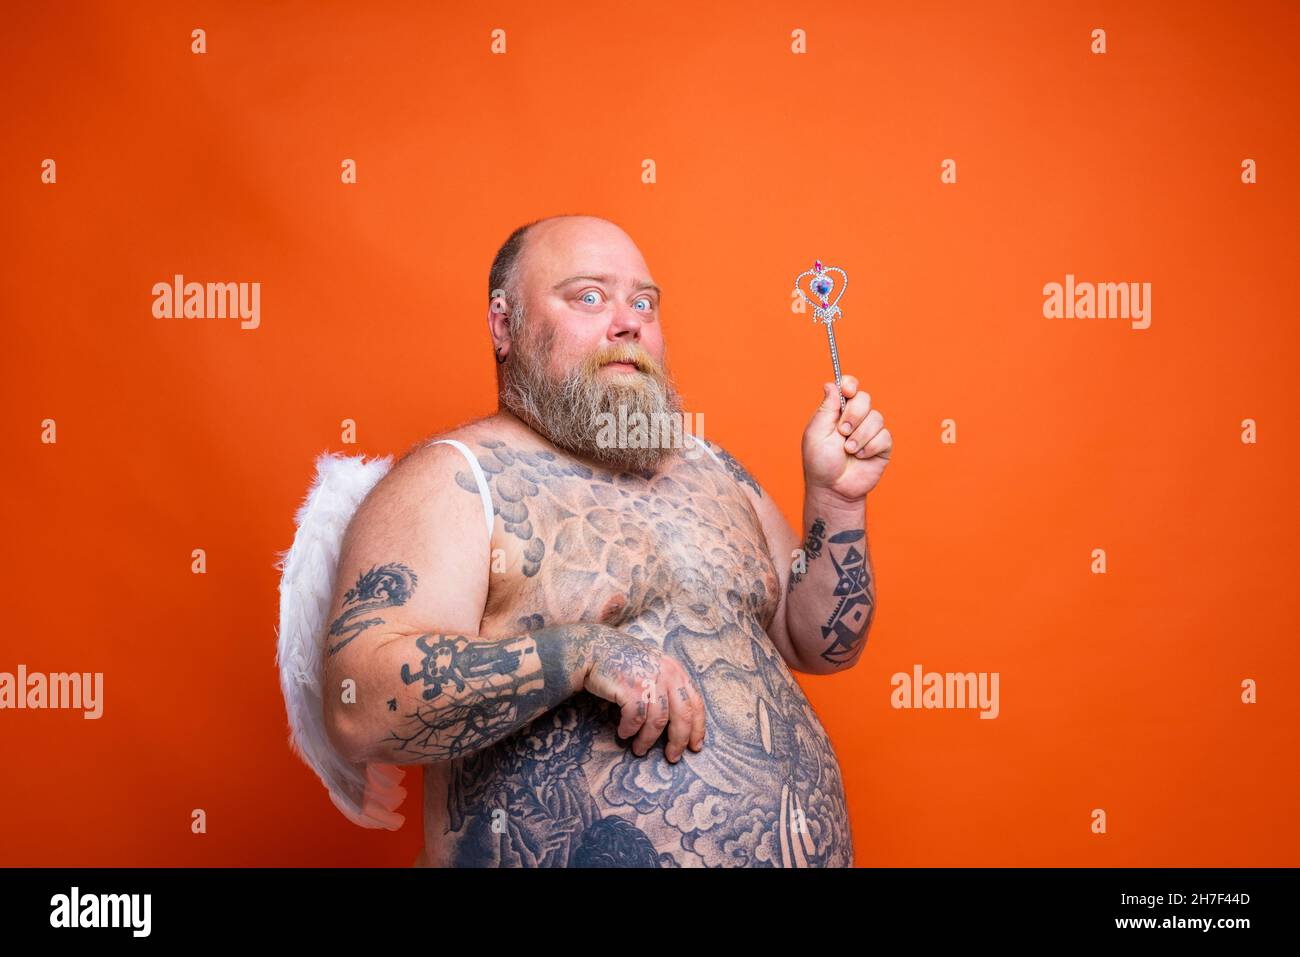 Fat thoughtful man with beard ,tattoos and wings acts like an magic fairy Stock Photo